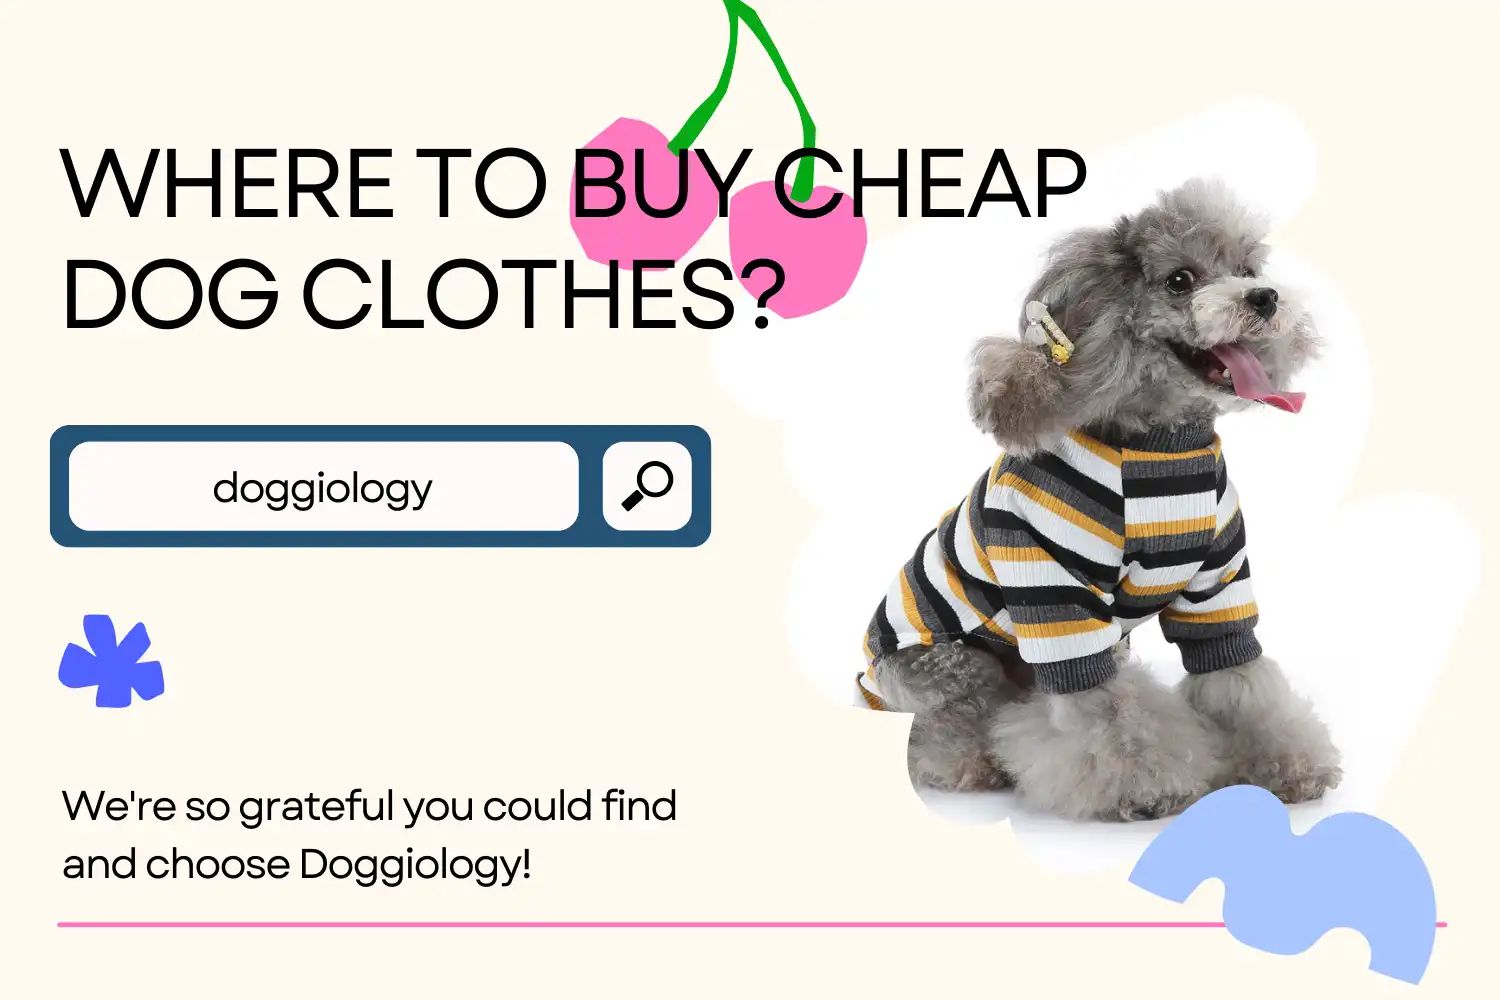 Where to Buy Cheap Dog Clothes?